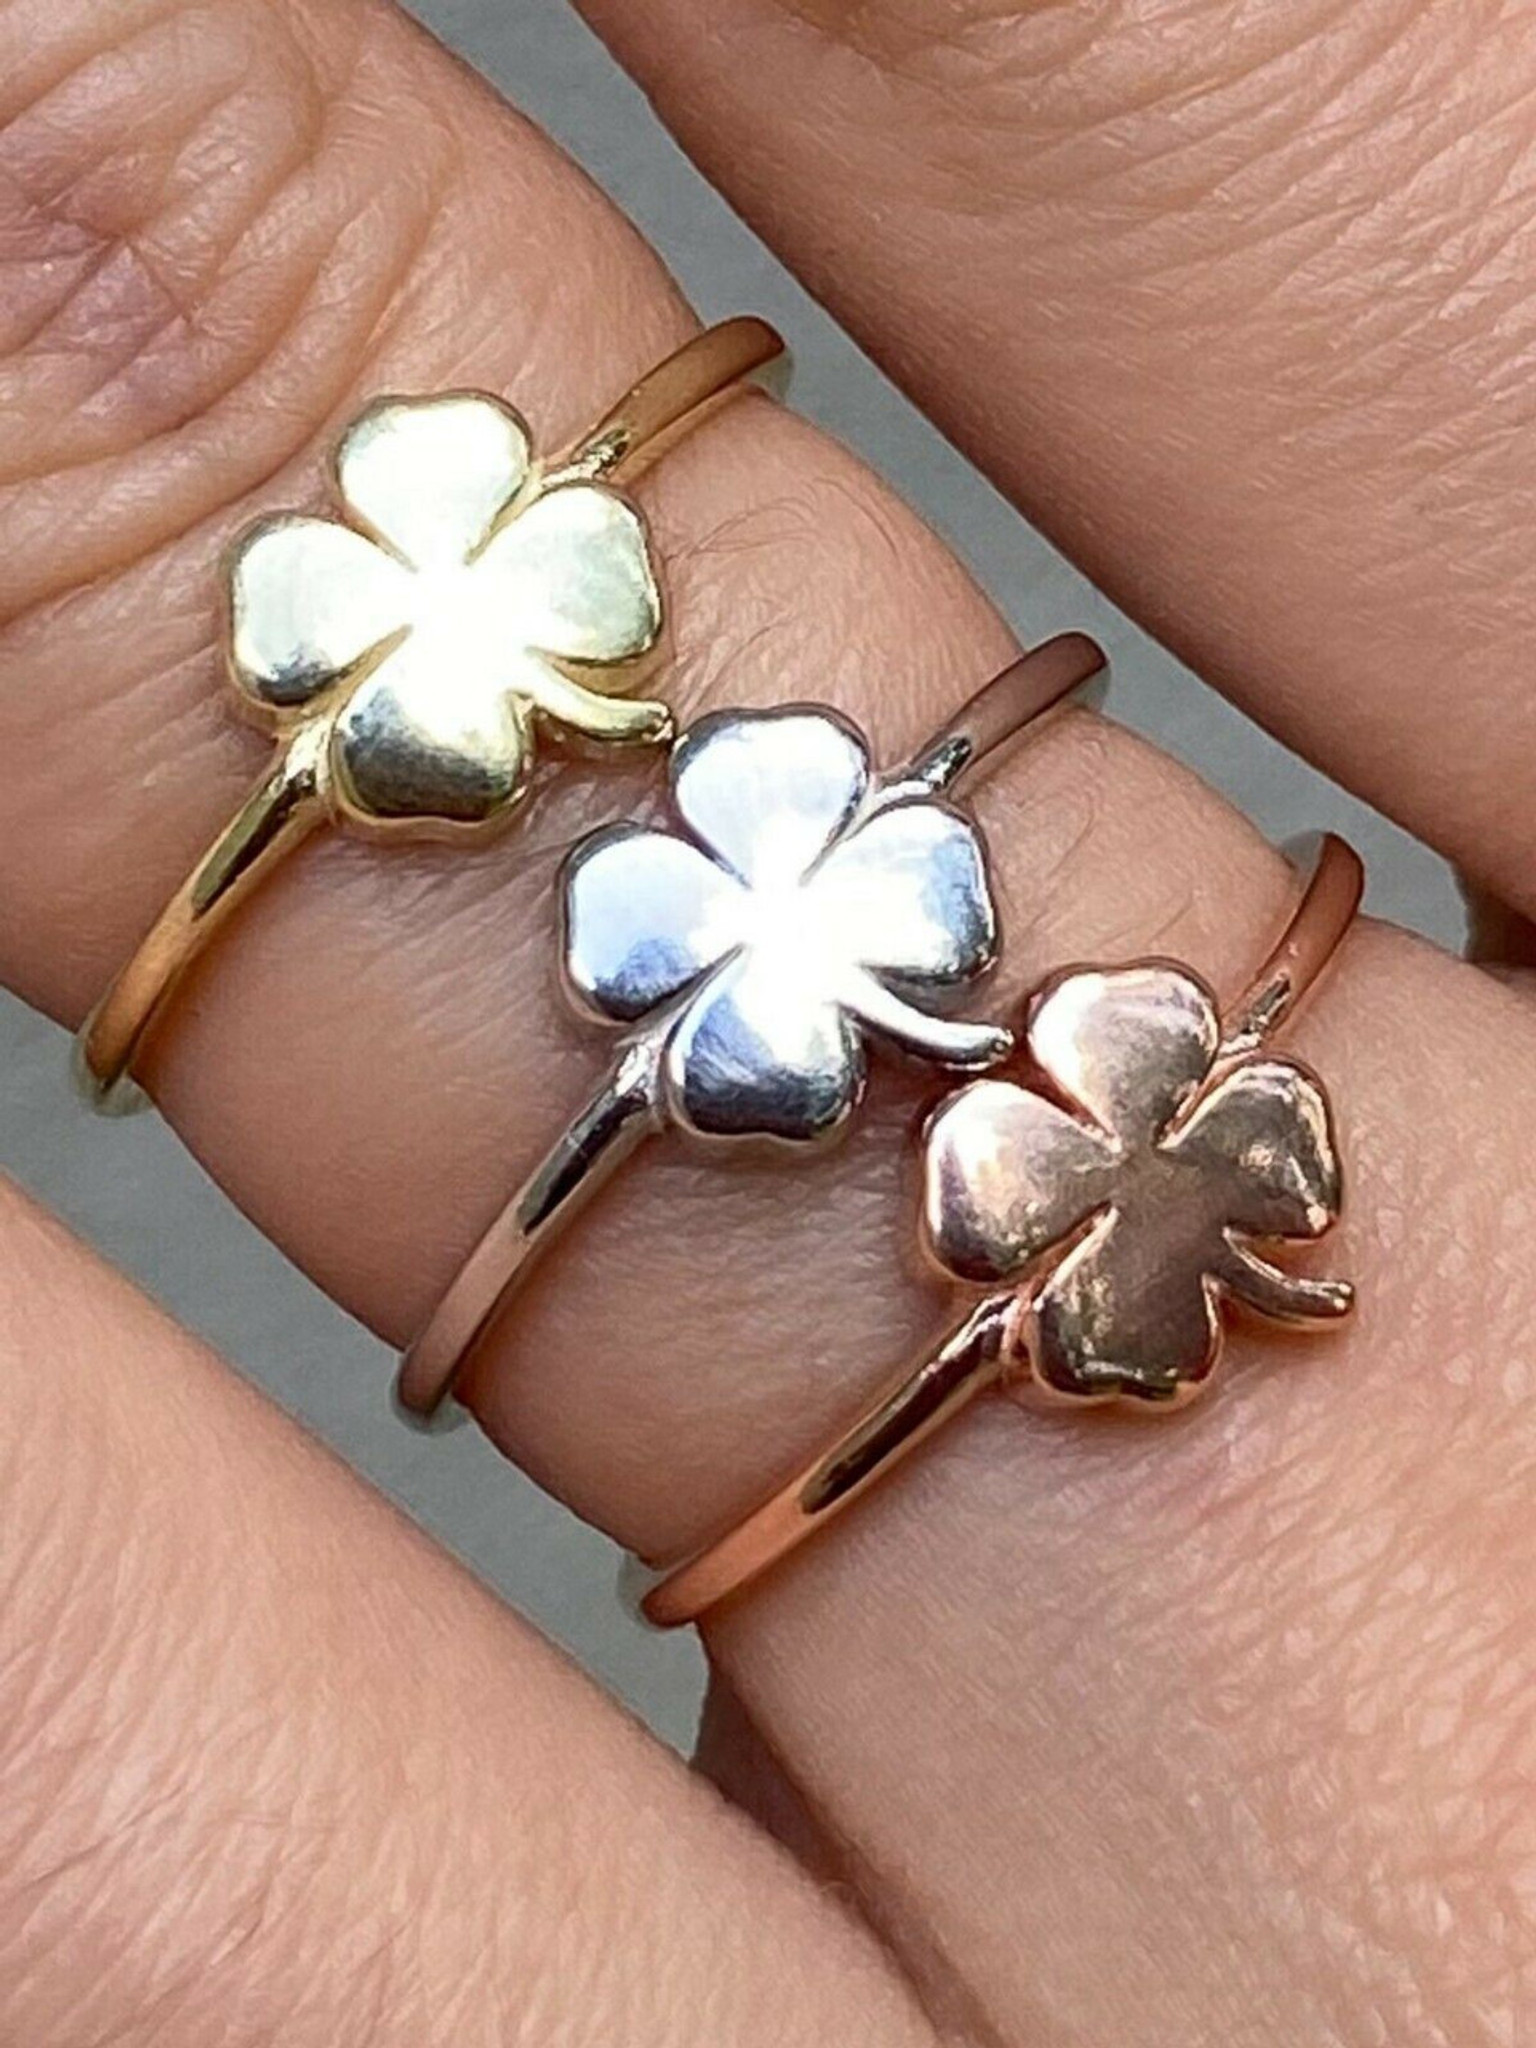 Four Leaf Clover Ring Sizes 5-10 925 Sterling Silver Or Yellow Rose Gold  Finish